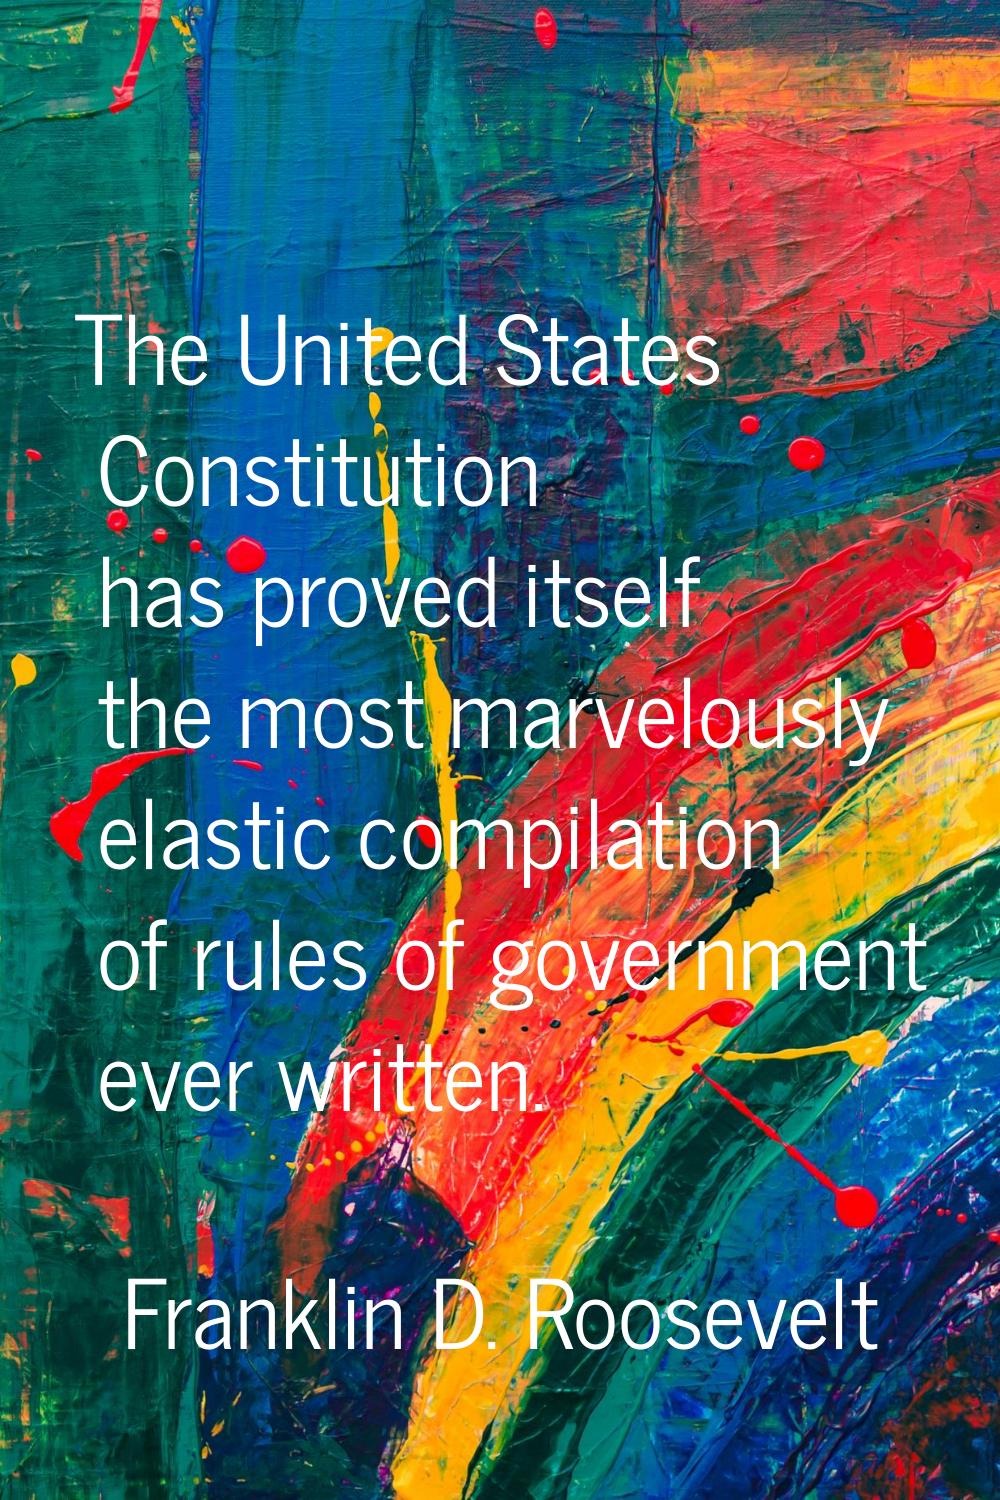 The United States Constitution has proved itself the most marvelously elastic compilation of rules 